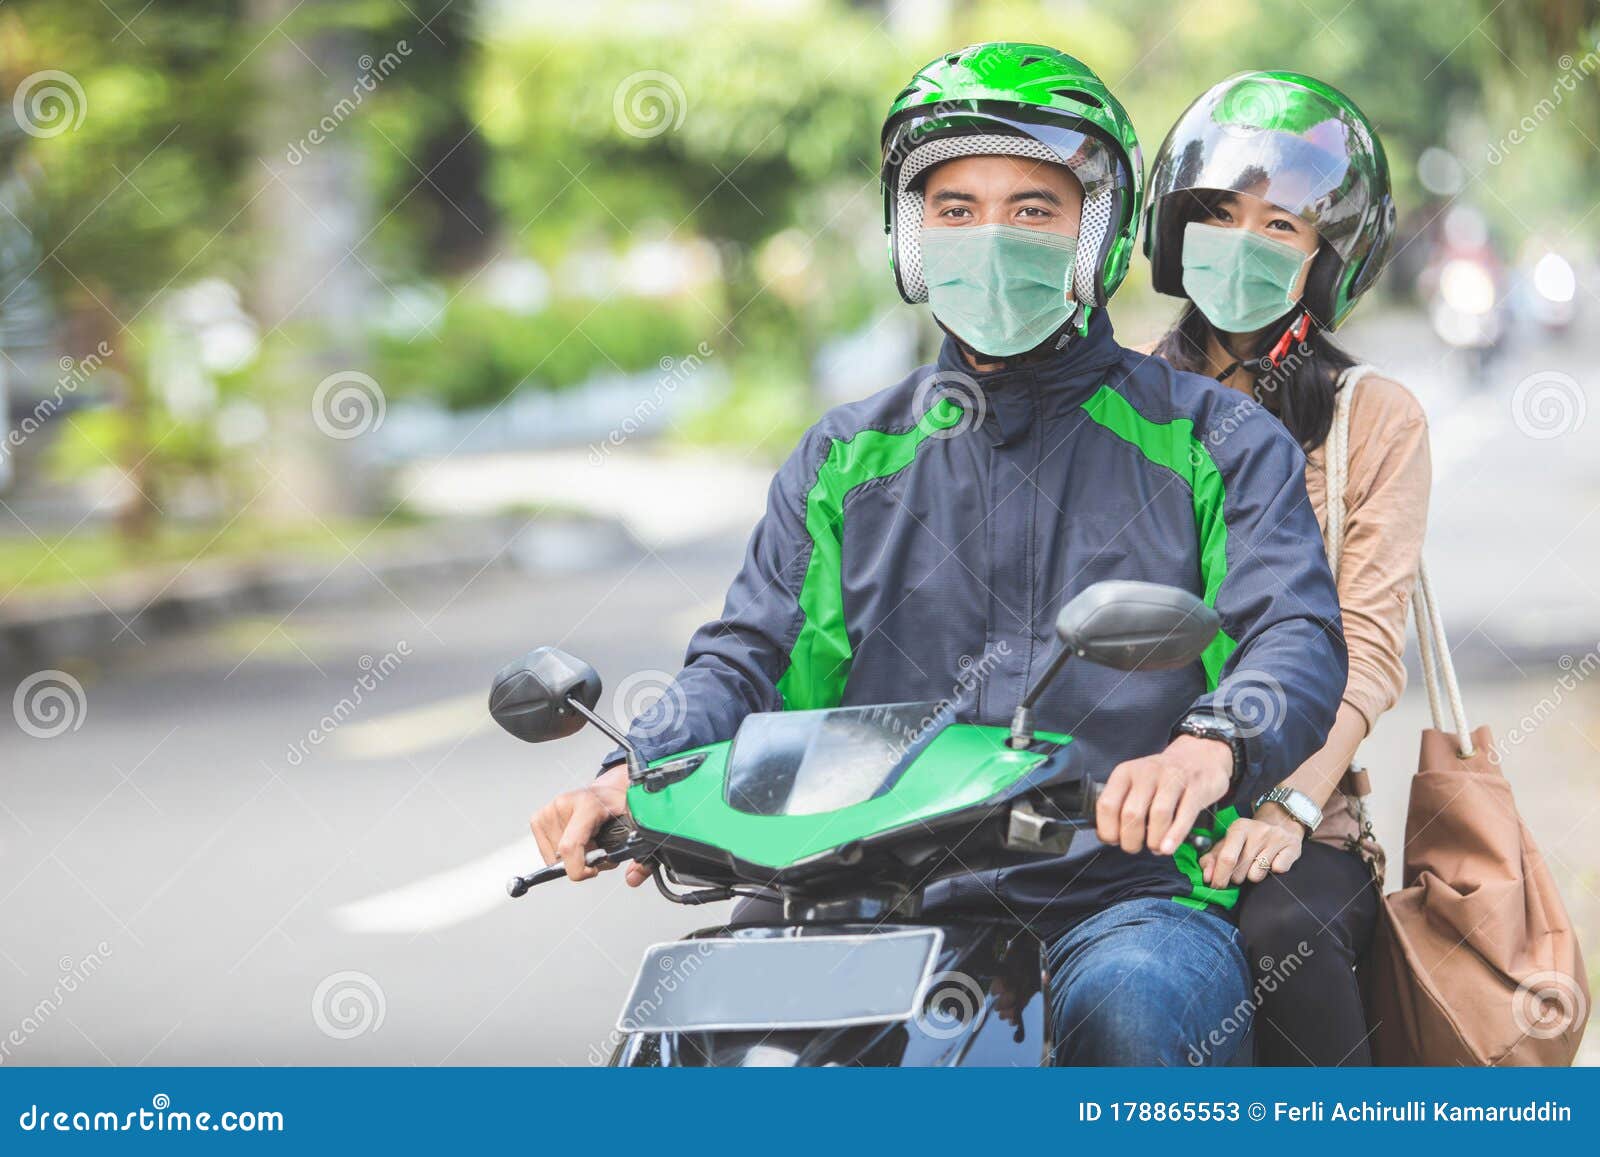 commercial motorcycle taxi driver taking his passenger to her de